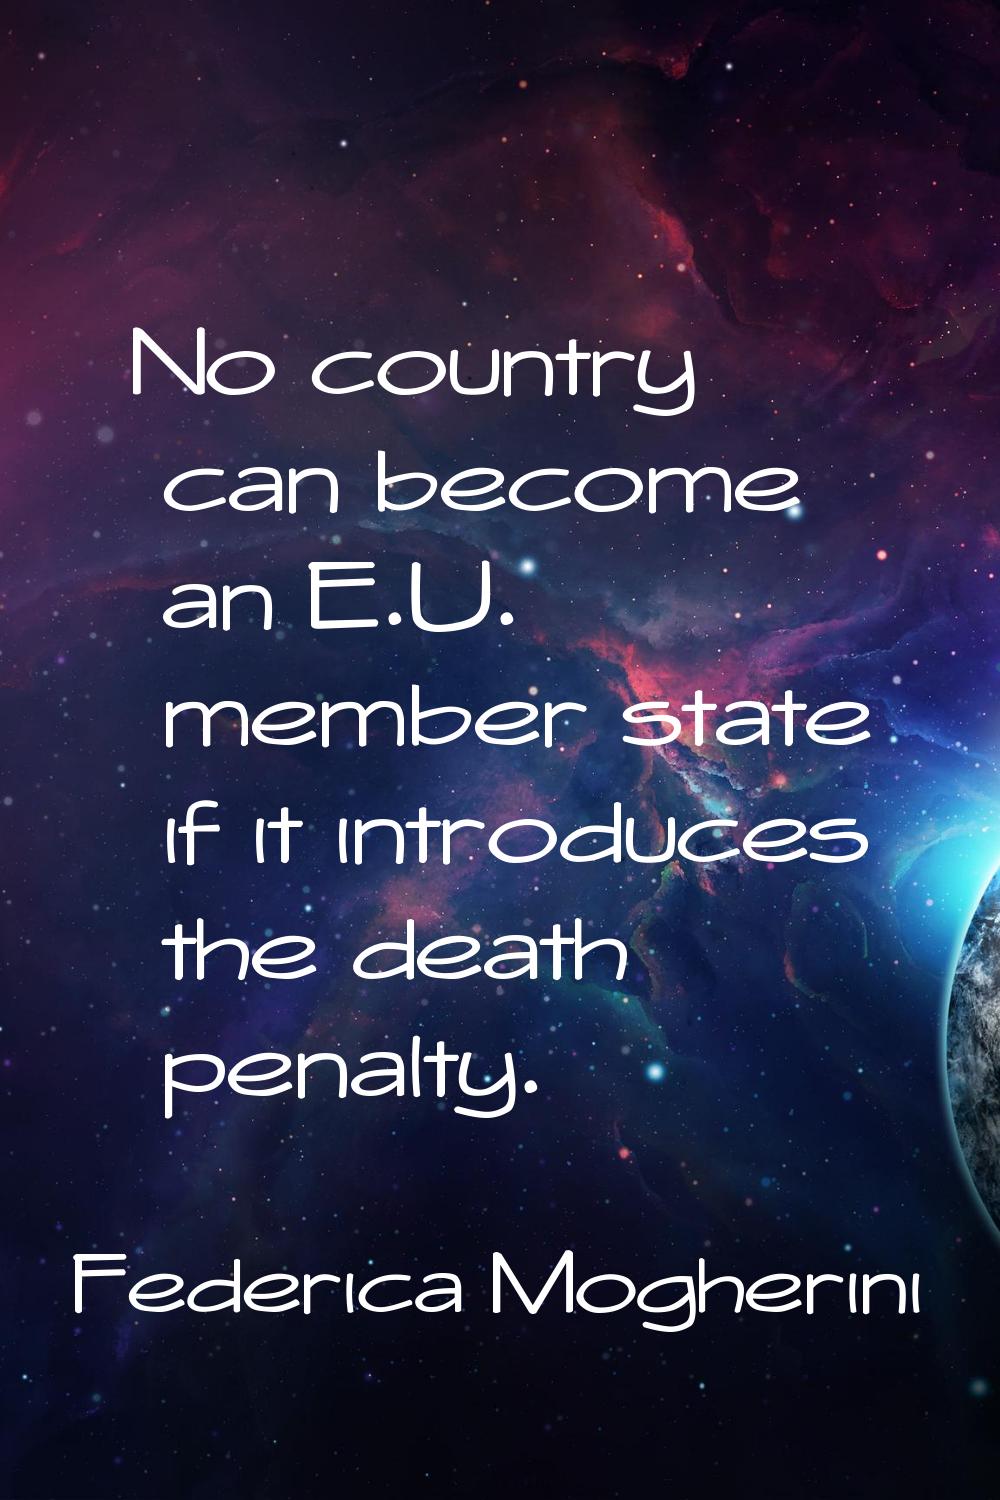 No country can become an E.U. member state if it introduces the death penalty.